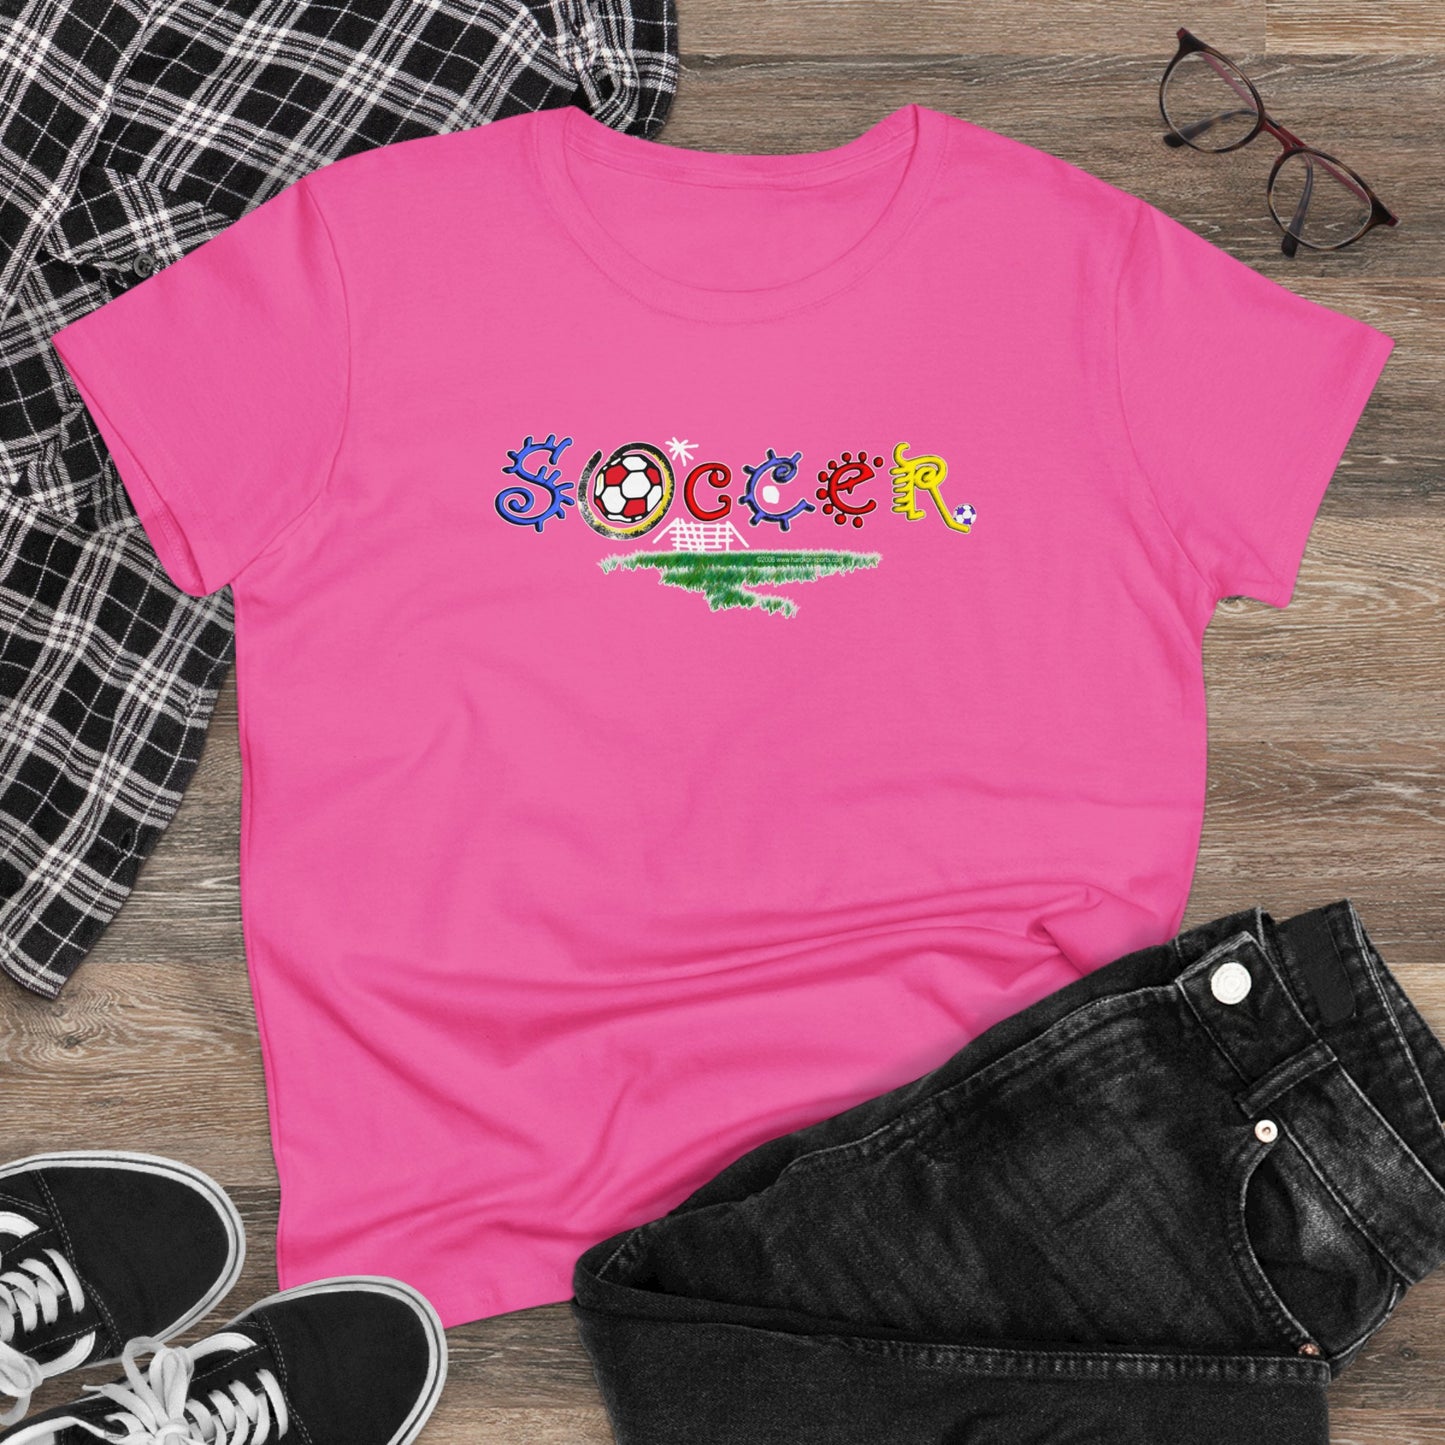 Artistic Soccer Girls T-Shirt, Ladies Soccer Design with Whimsical Soccer Design, Cute hand drawn look, stylized font, Soccer Gift for Women